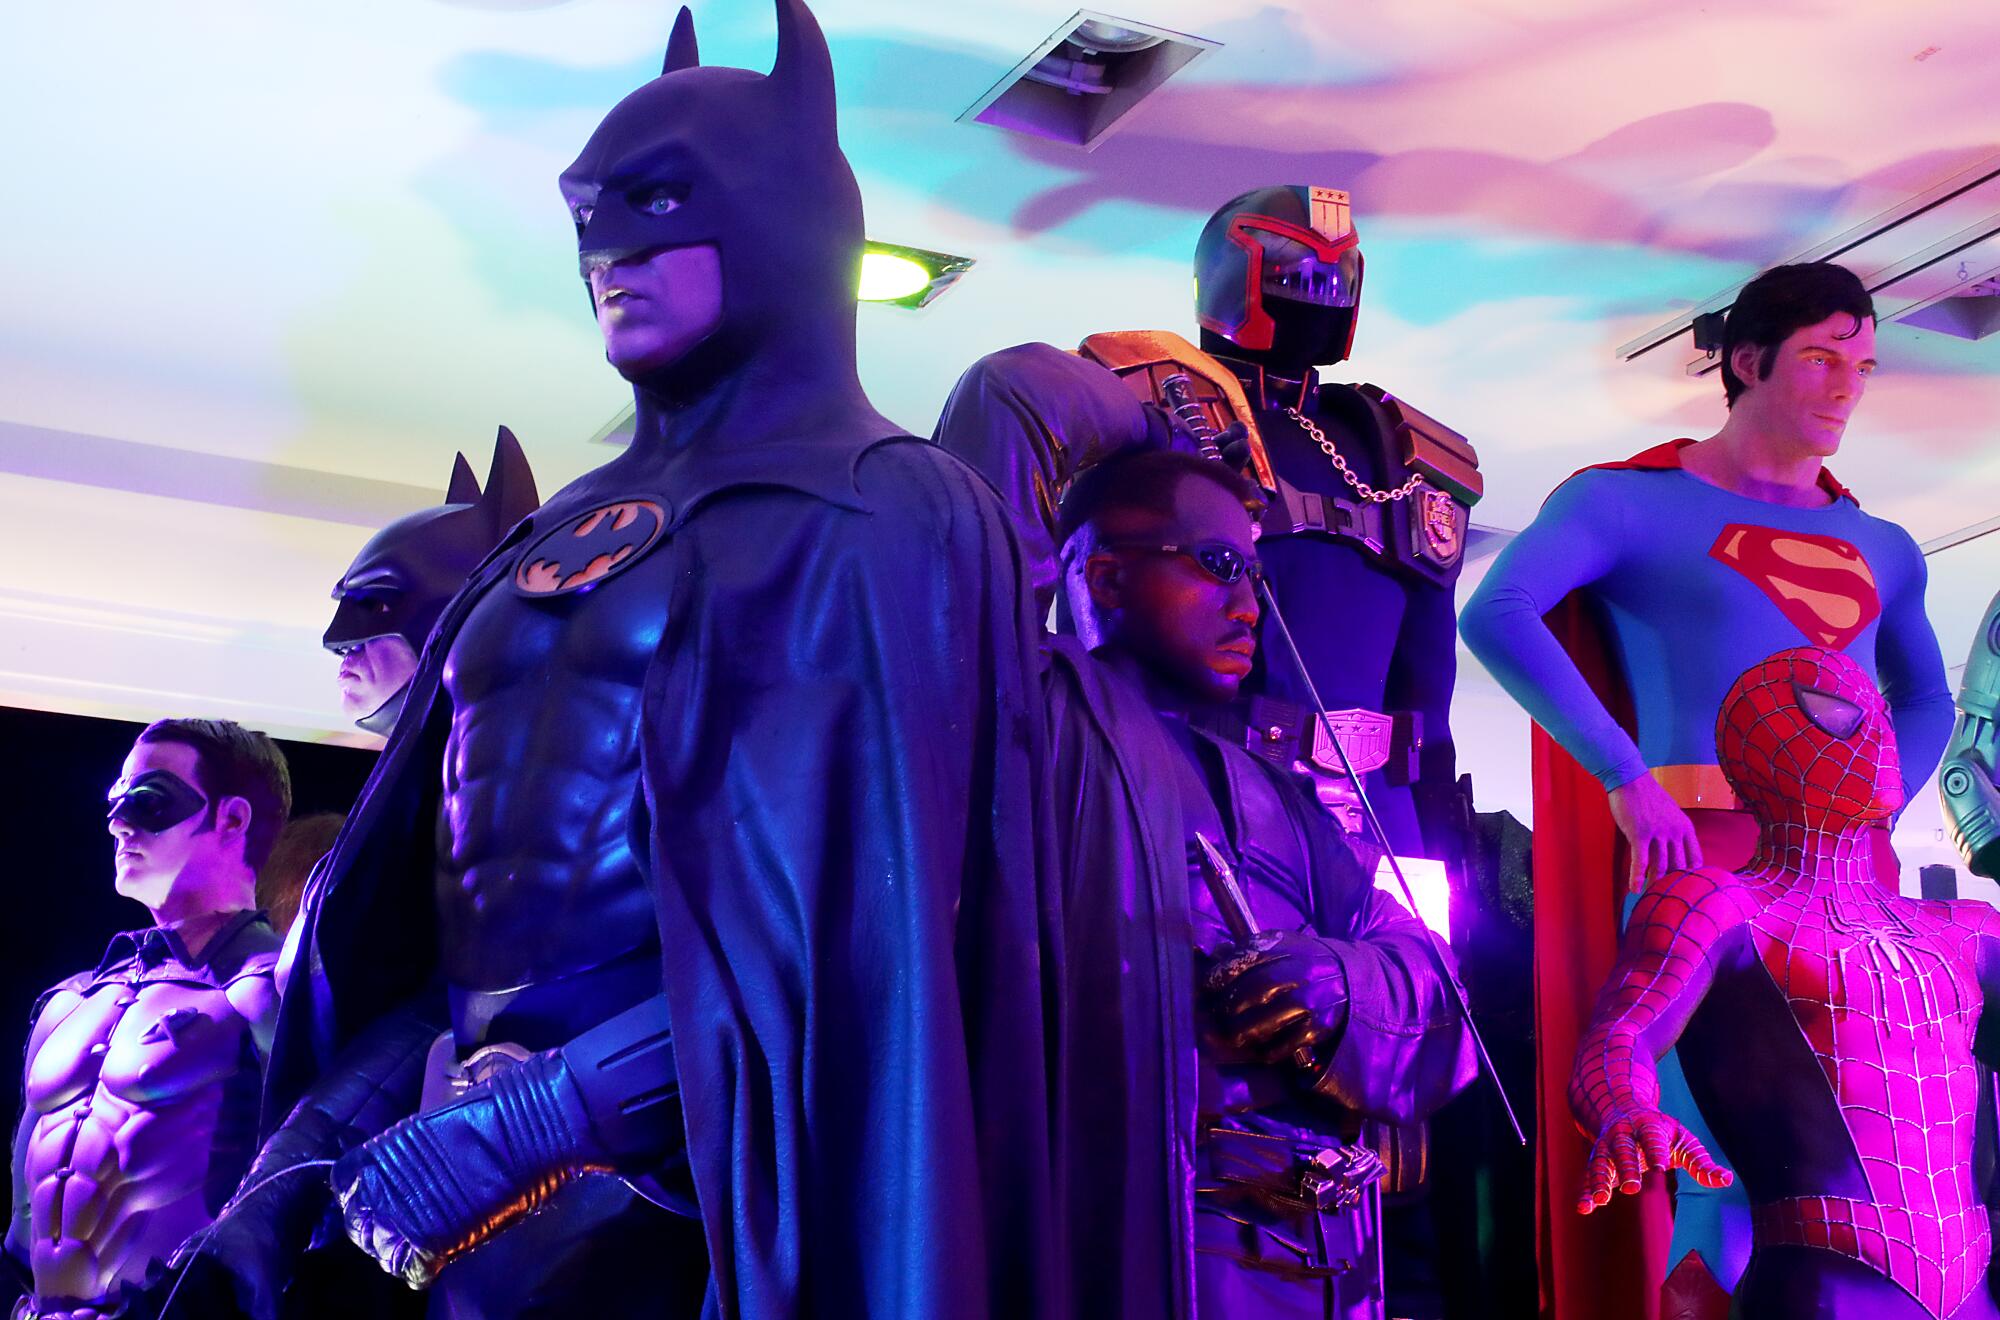 Batman, Superman and Spiderman are among the superheroes featured as part of the Icons of Darkness attraction.